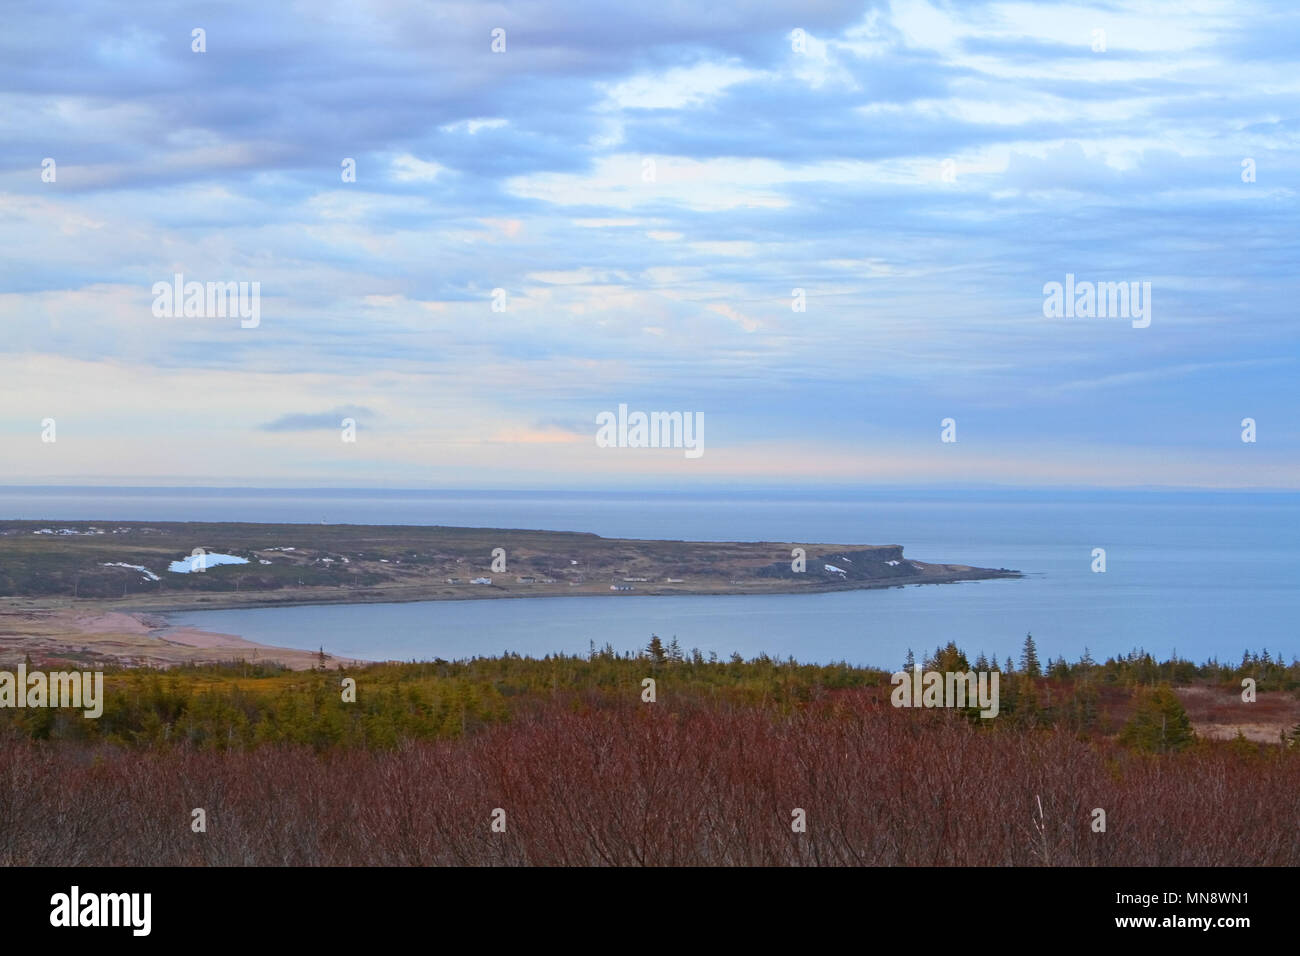 Small village, L'ANS AU LOUP, Labrador, Canada, on the Strait of Belle Isle. Stock Photo